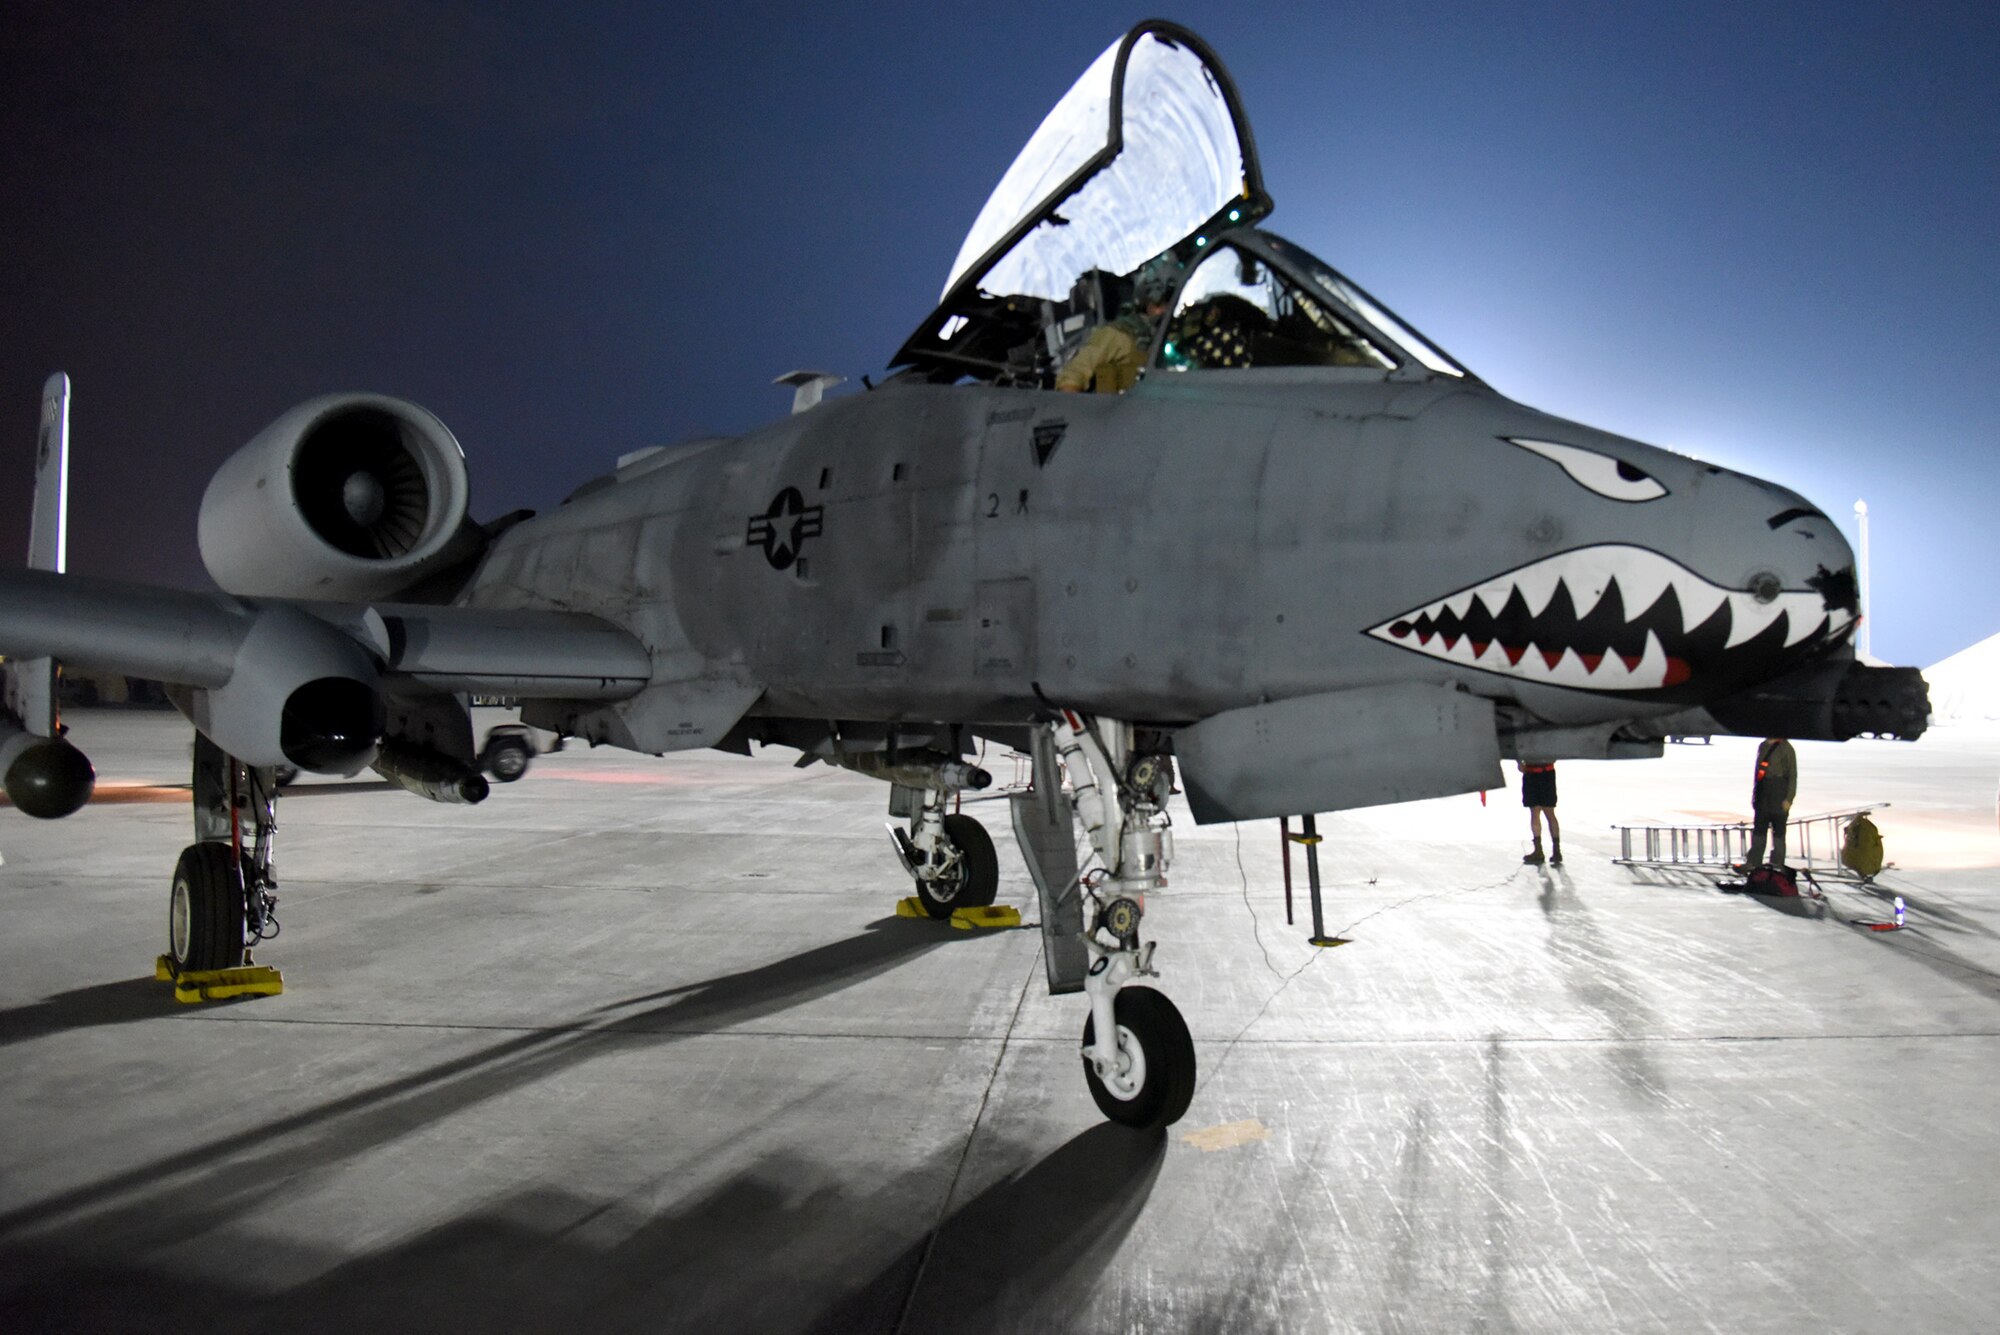 U.S. Air Force 1st Lt Pablo Manceuax, 75th Expeditionary Fighter Squadron A-10 Thunderbolt II pilot, goes through his pre-flight check list before a combat sortie out of Al Dhafra Air Base, United Arab Emirates, April 20, 2023. The deployment of A-10s provides additional capabilities in tandem with other fighter aircraft throughout the region. (U.S. Air Force photo by Tech. Sgt. Chris Jacobs/released)